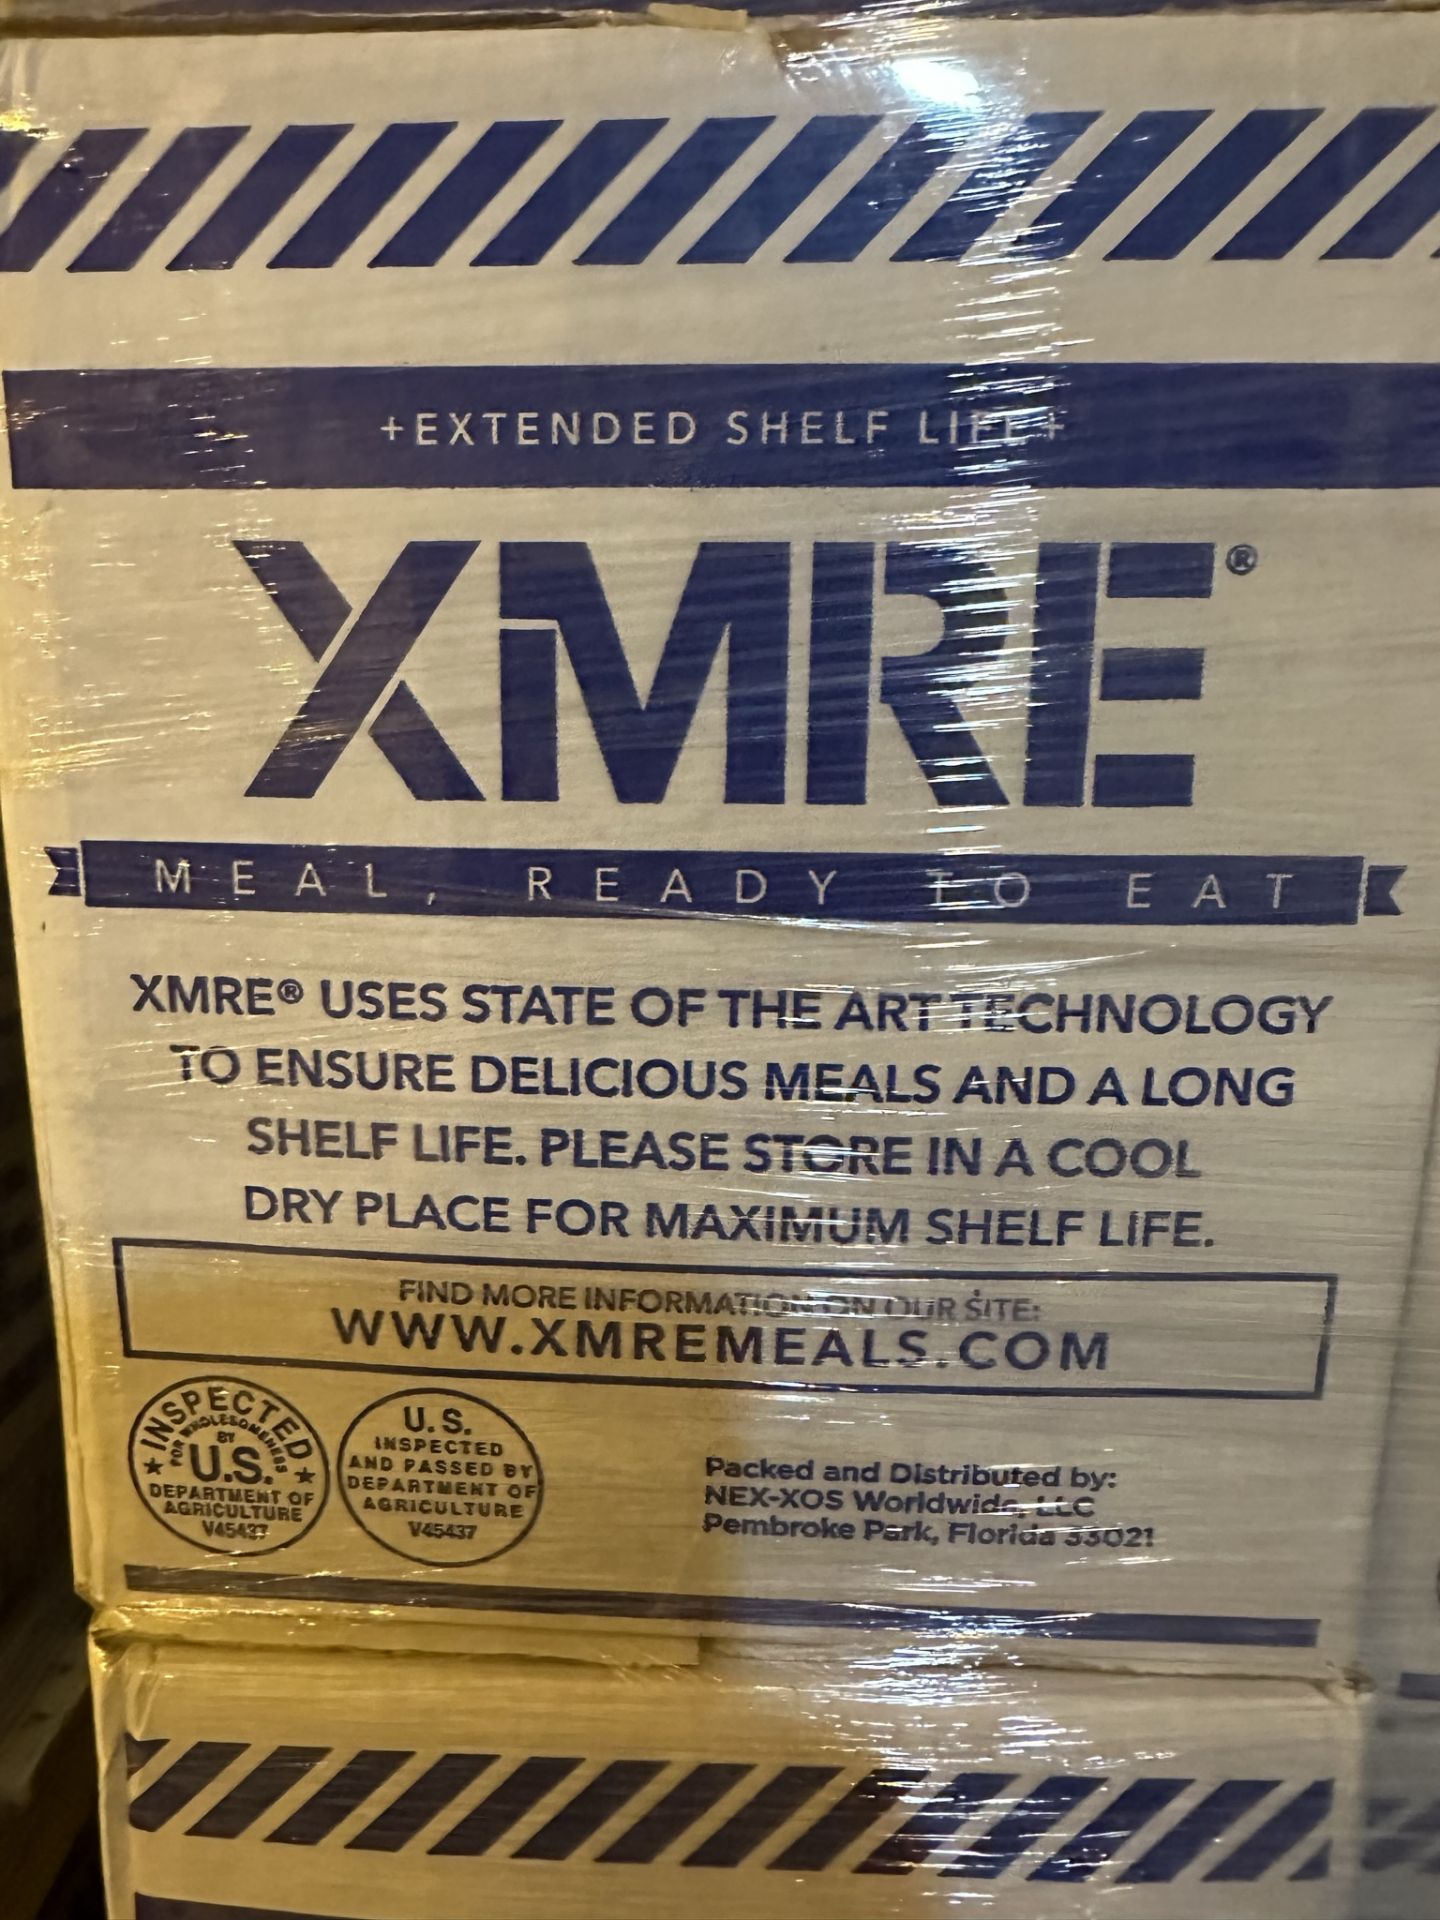 Lot of (48) Cases of XMRE Meals - Extended Shelf Life Meal, Ready to Eat - Image 15 of 16